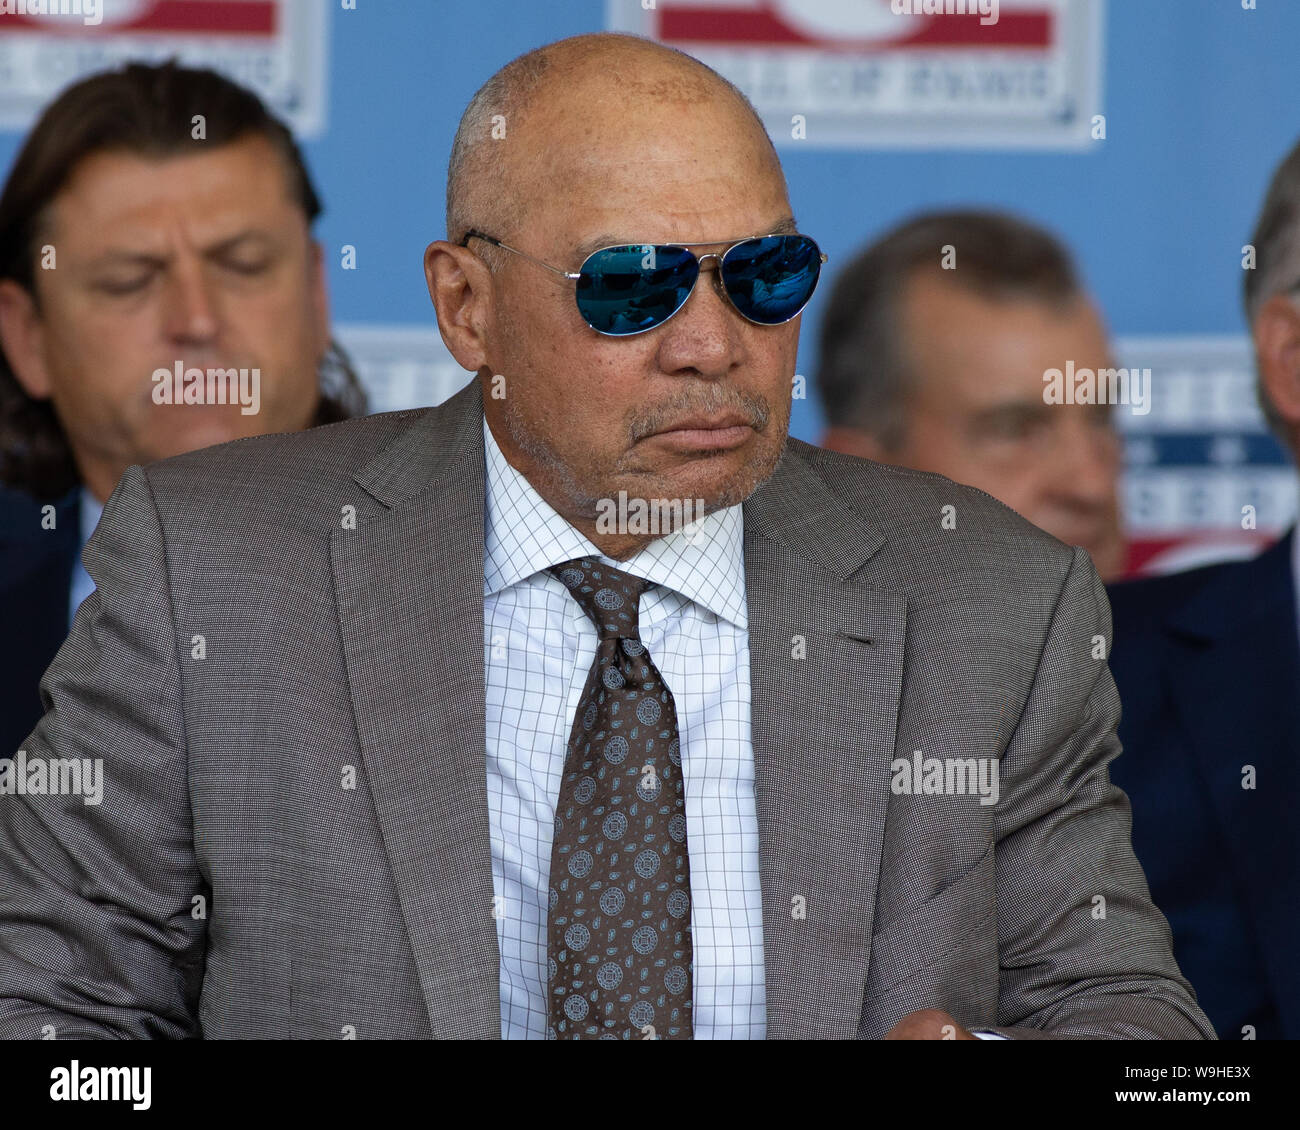 2019 MLB Cooperstown Induction Ceremony - Mariano Rivera, Roy Halladay, Edgar Martinez, Harold Baines, Lee Smith inducted into Baseball Hall of Fame Stock Photo